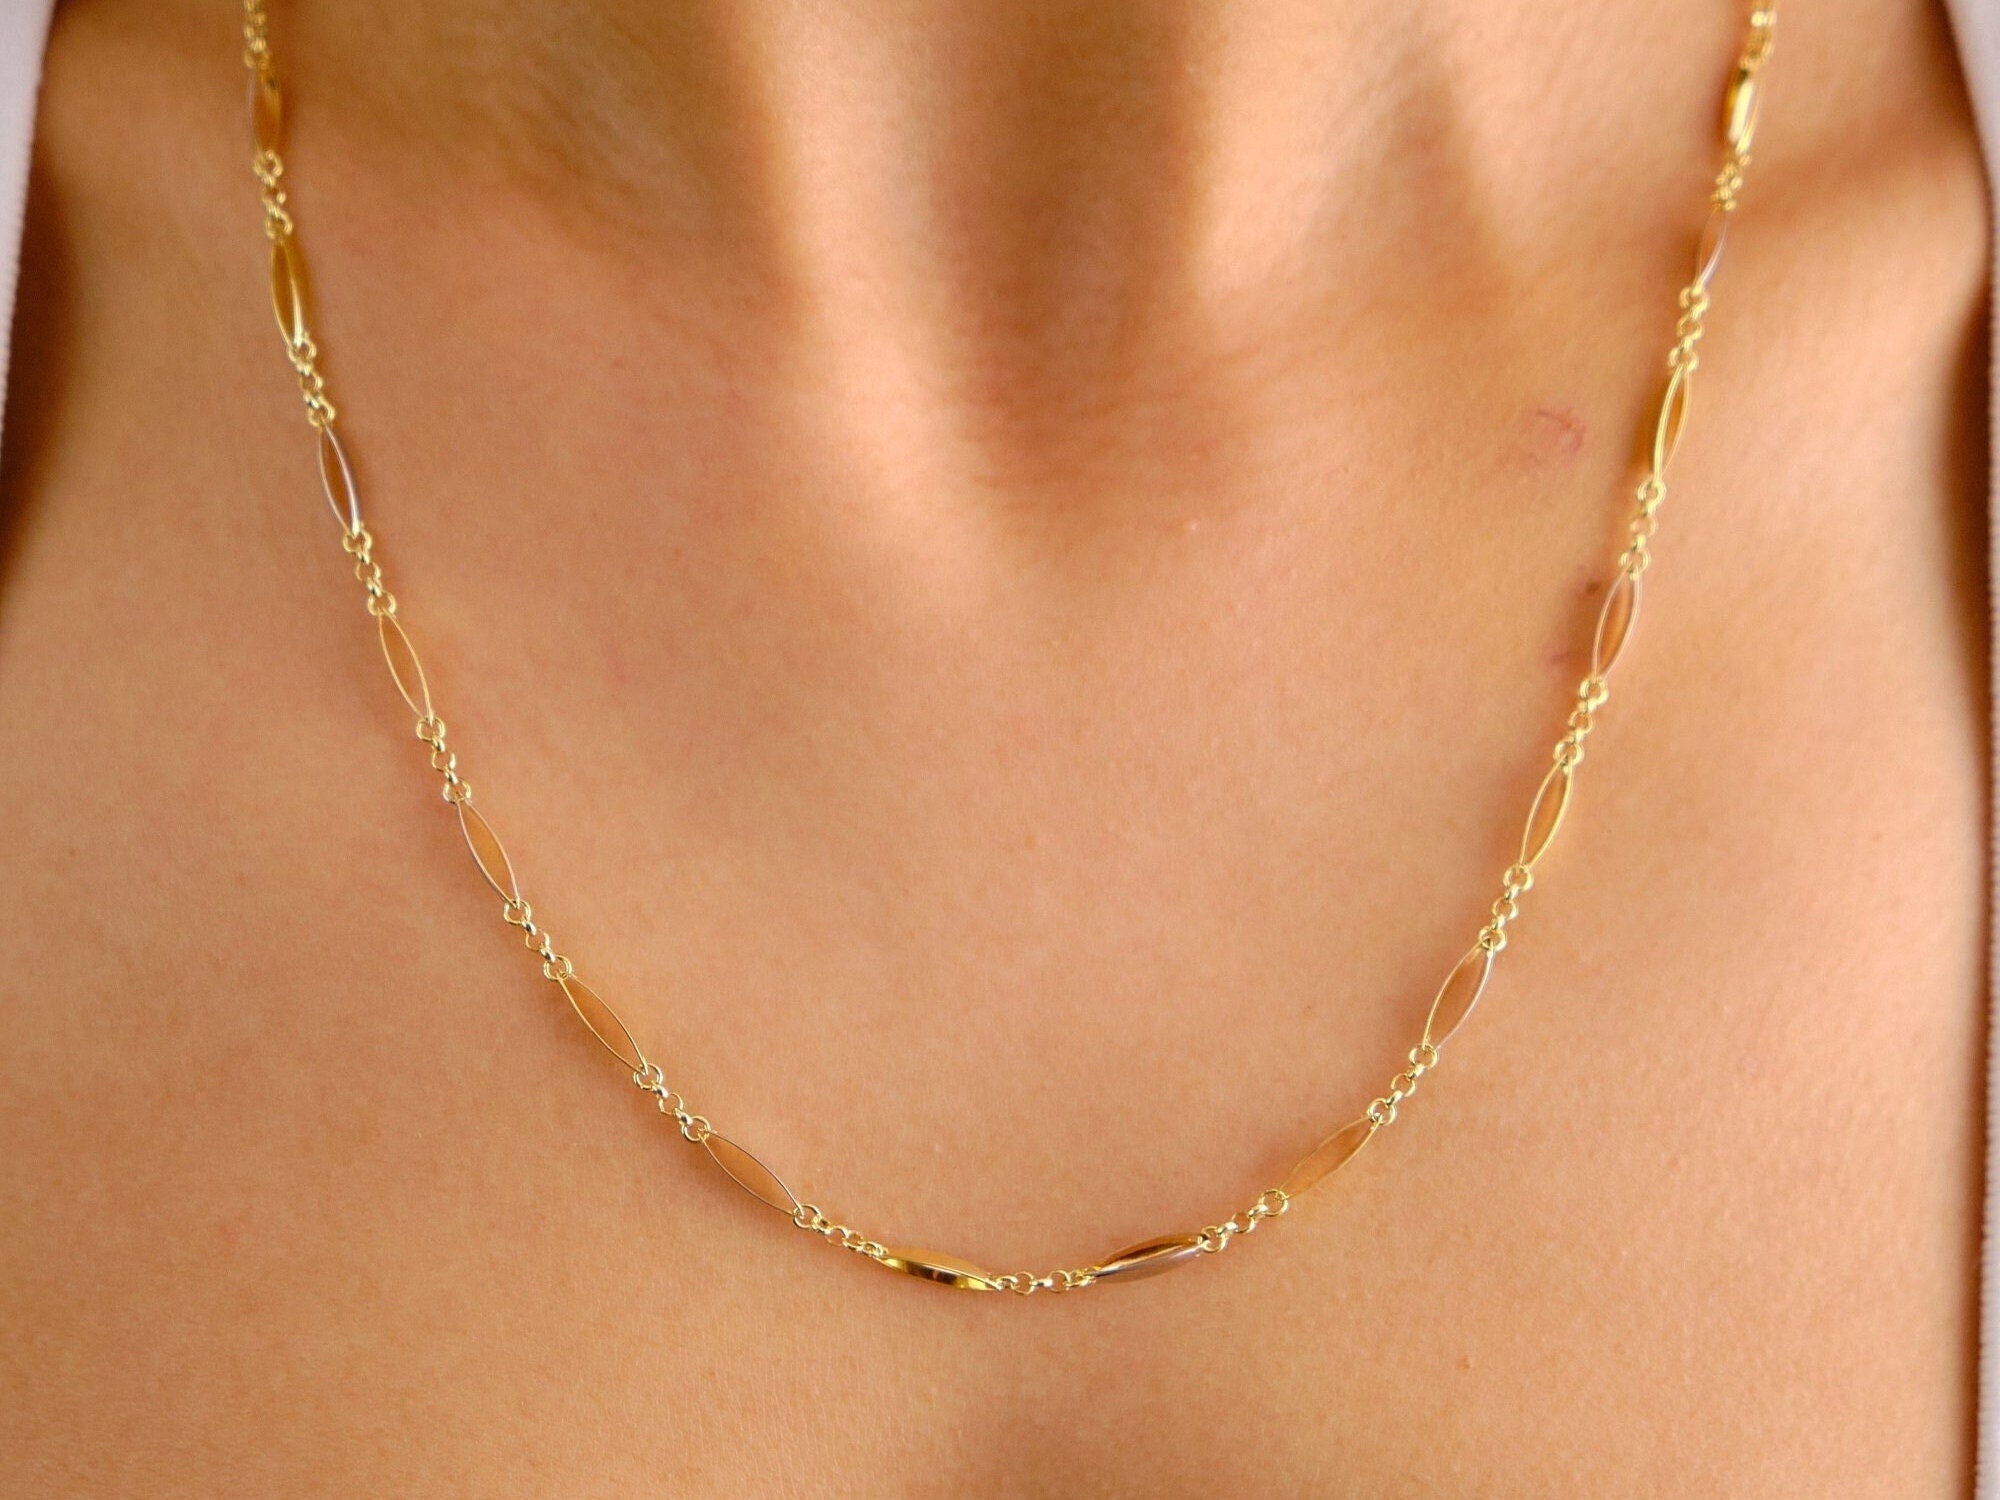 14K Gold Figaro Chain Necklace, 2mm Oval Figaro Chain Choker, Dainty Layering Gold Necklace, Men Women Figaro Chain Necklace, Thin Chain